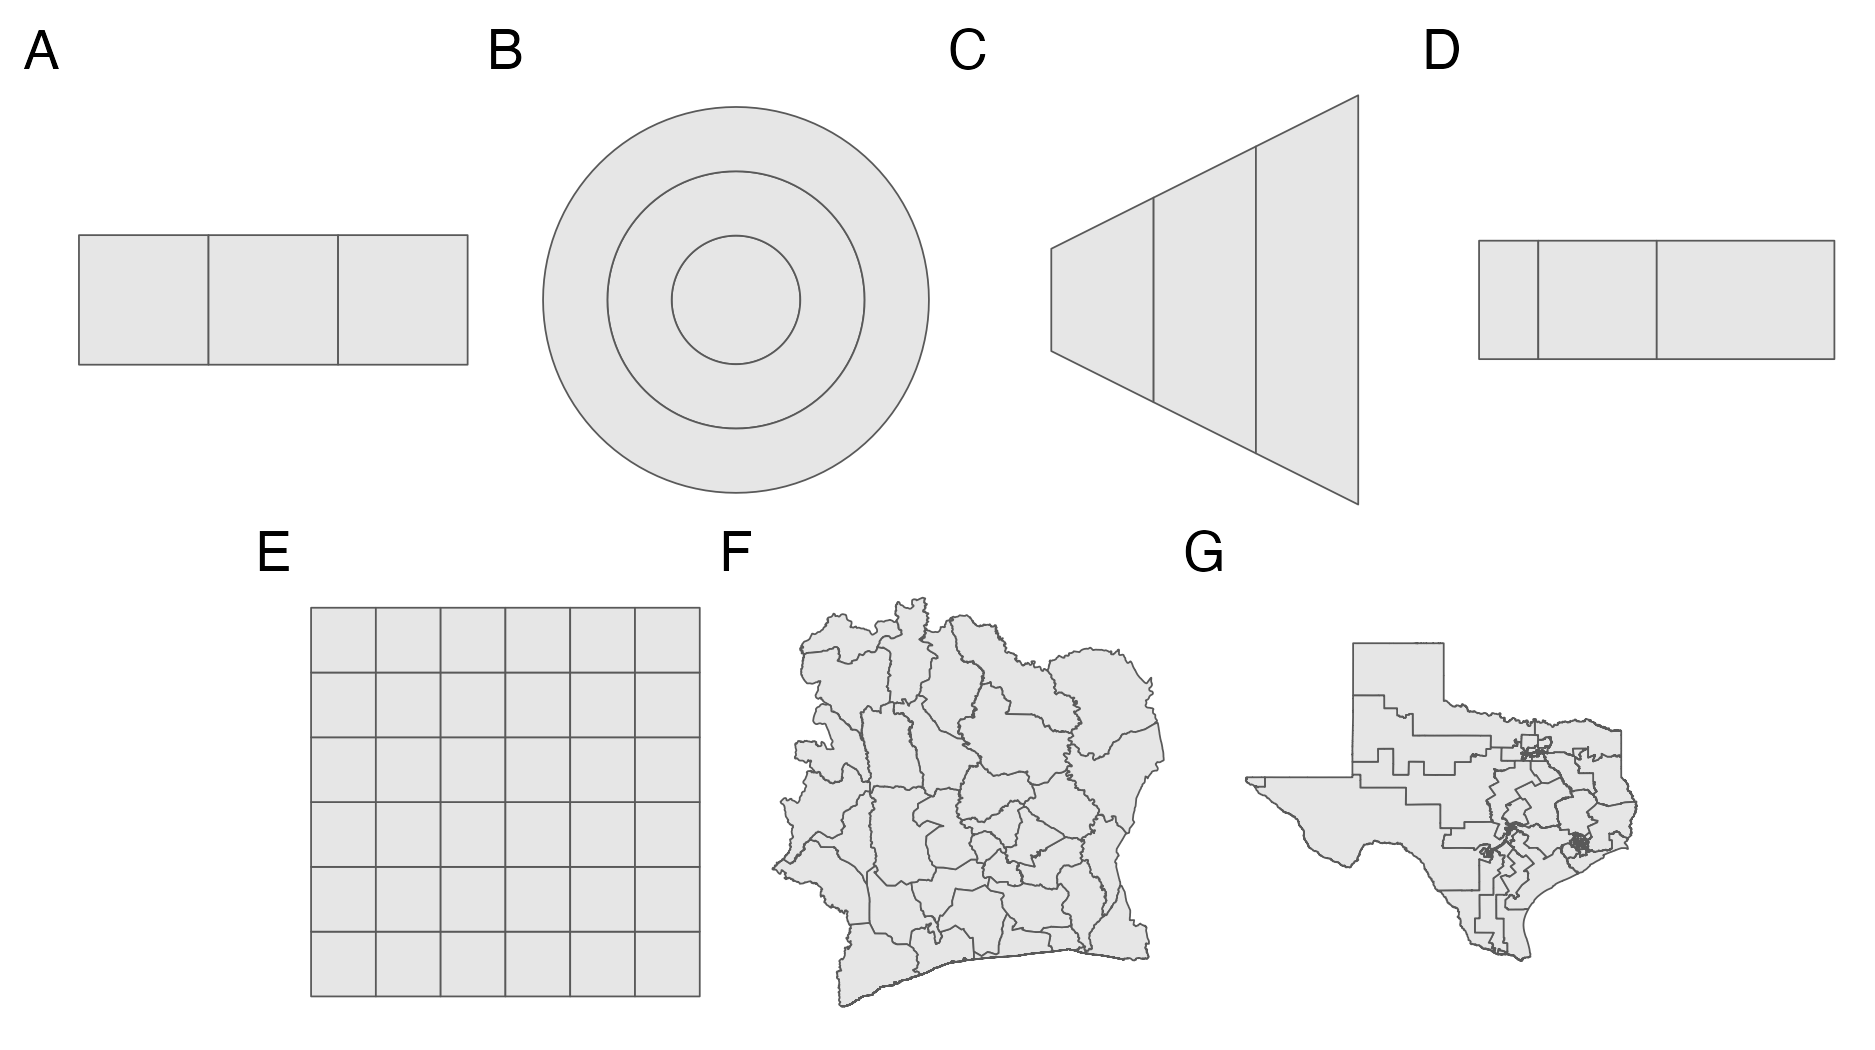 Seven geometries were considered in the simulation study. These were the four geometries from Figure 4.2 shown in Panel A, B, C and D, and three more realistic geometries shown in Panel E, F and G.